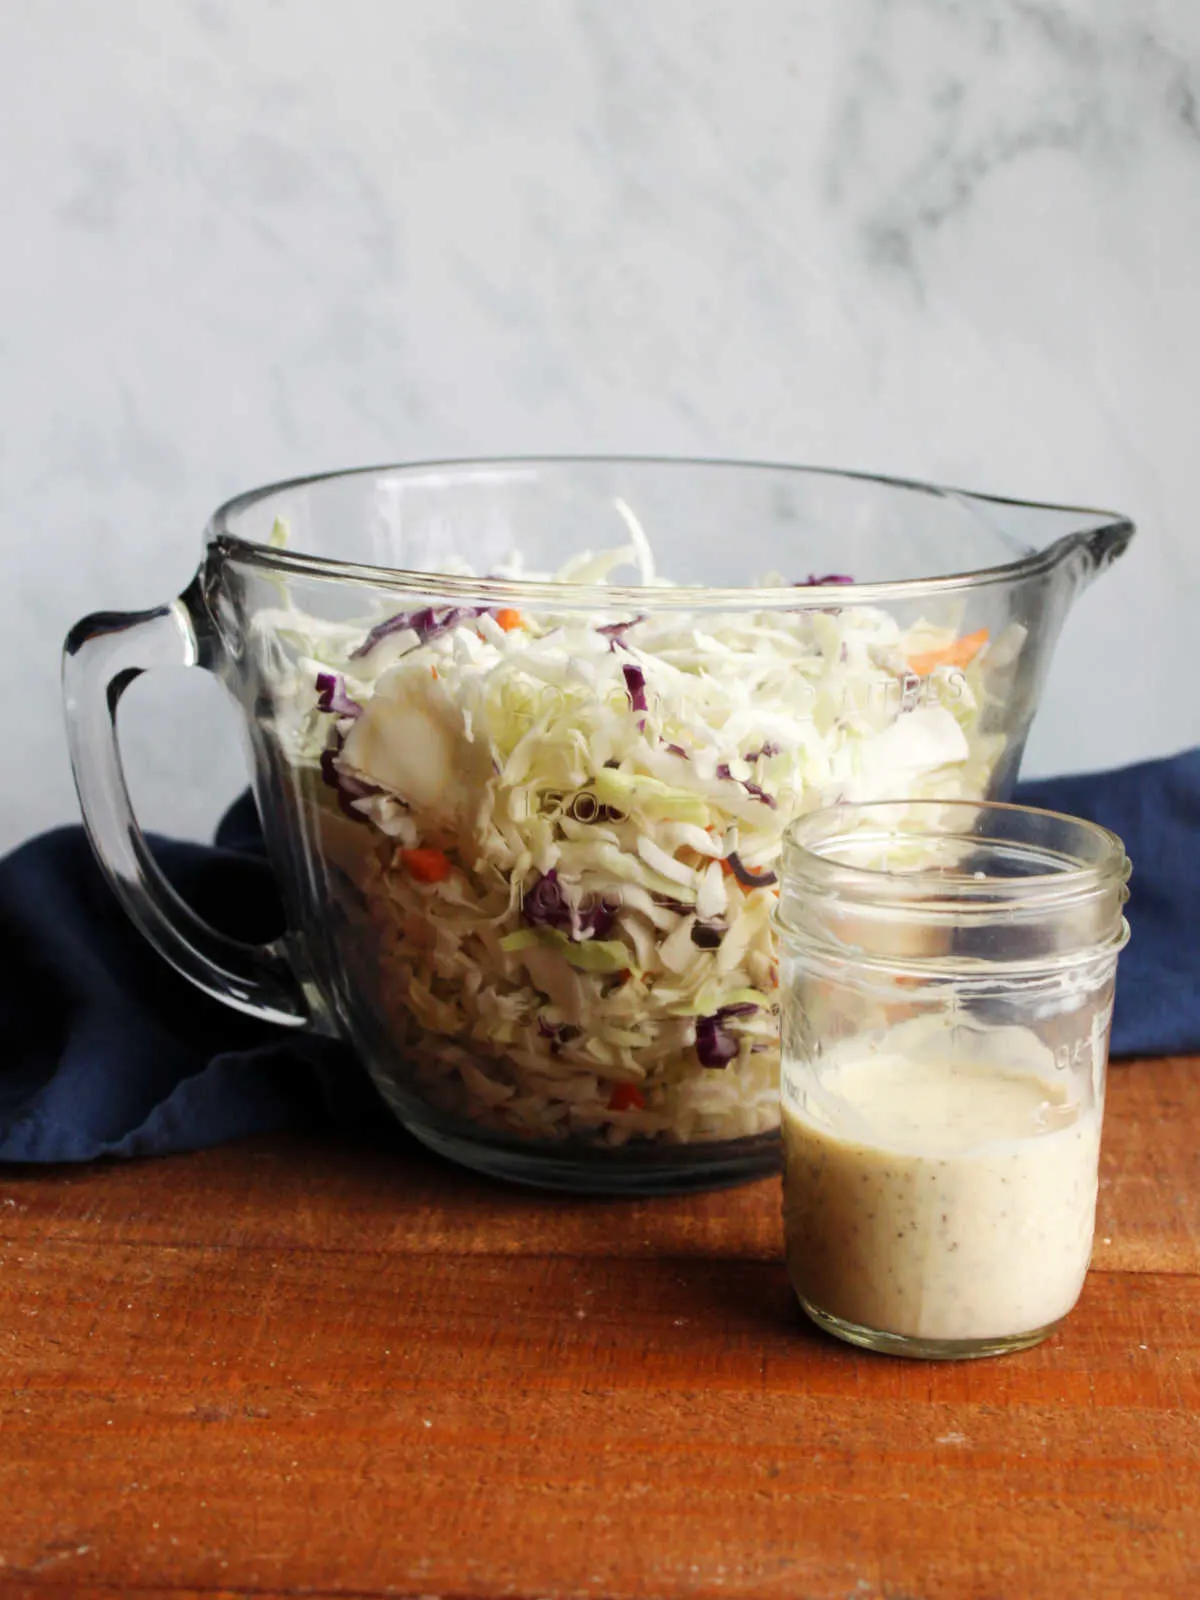 Large glass bowl filled with shredded cabbage next to jar of condensed milk dressing.